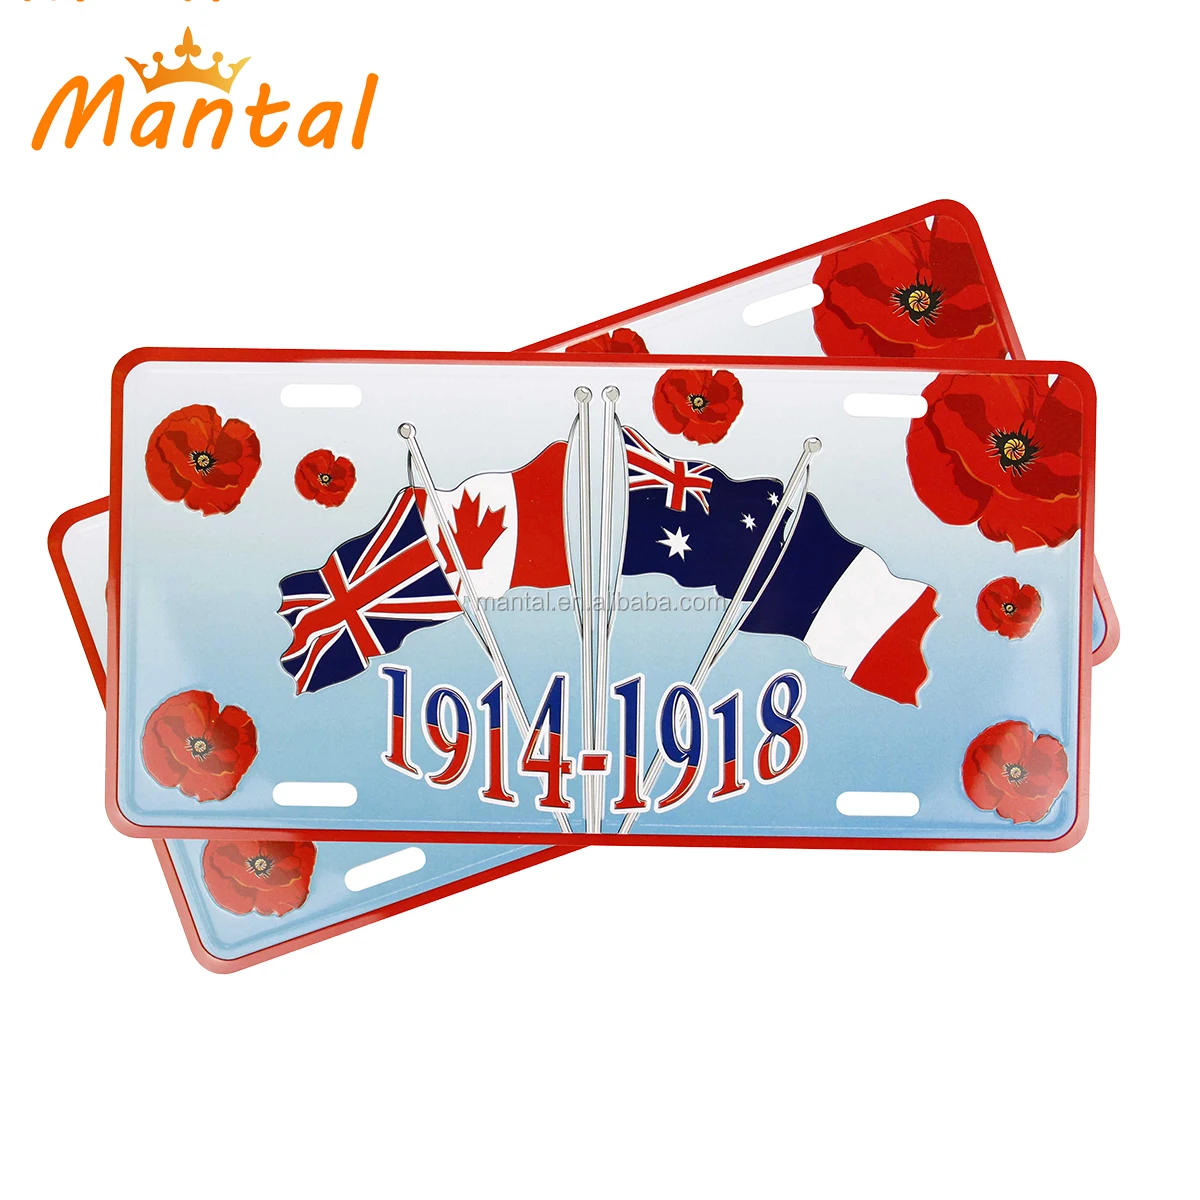 Details about   Malta Any Text Personalized Novelty Aluminum Car License Plate 